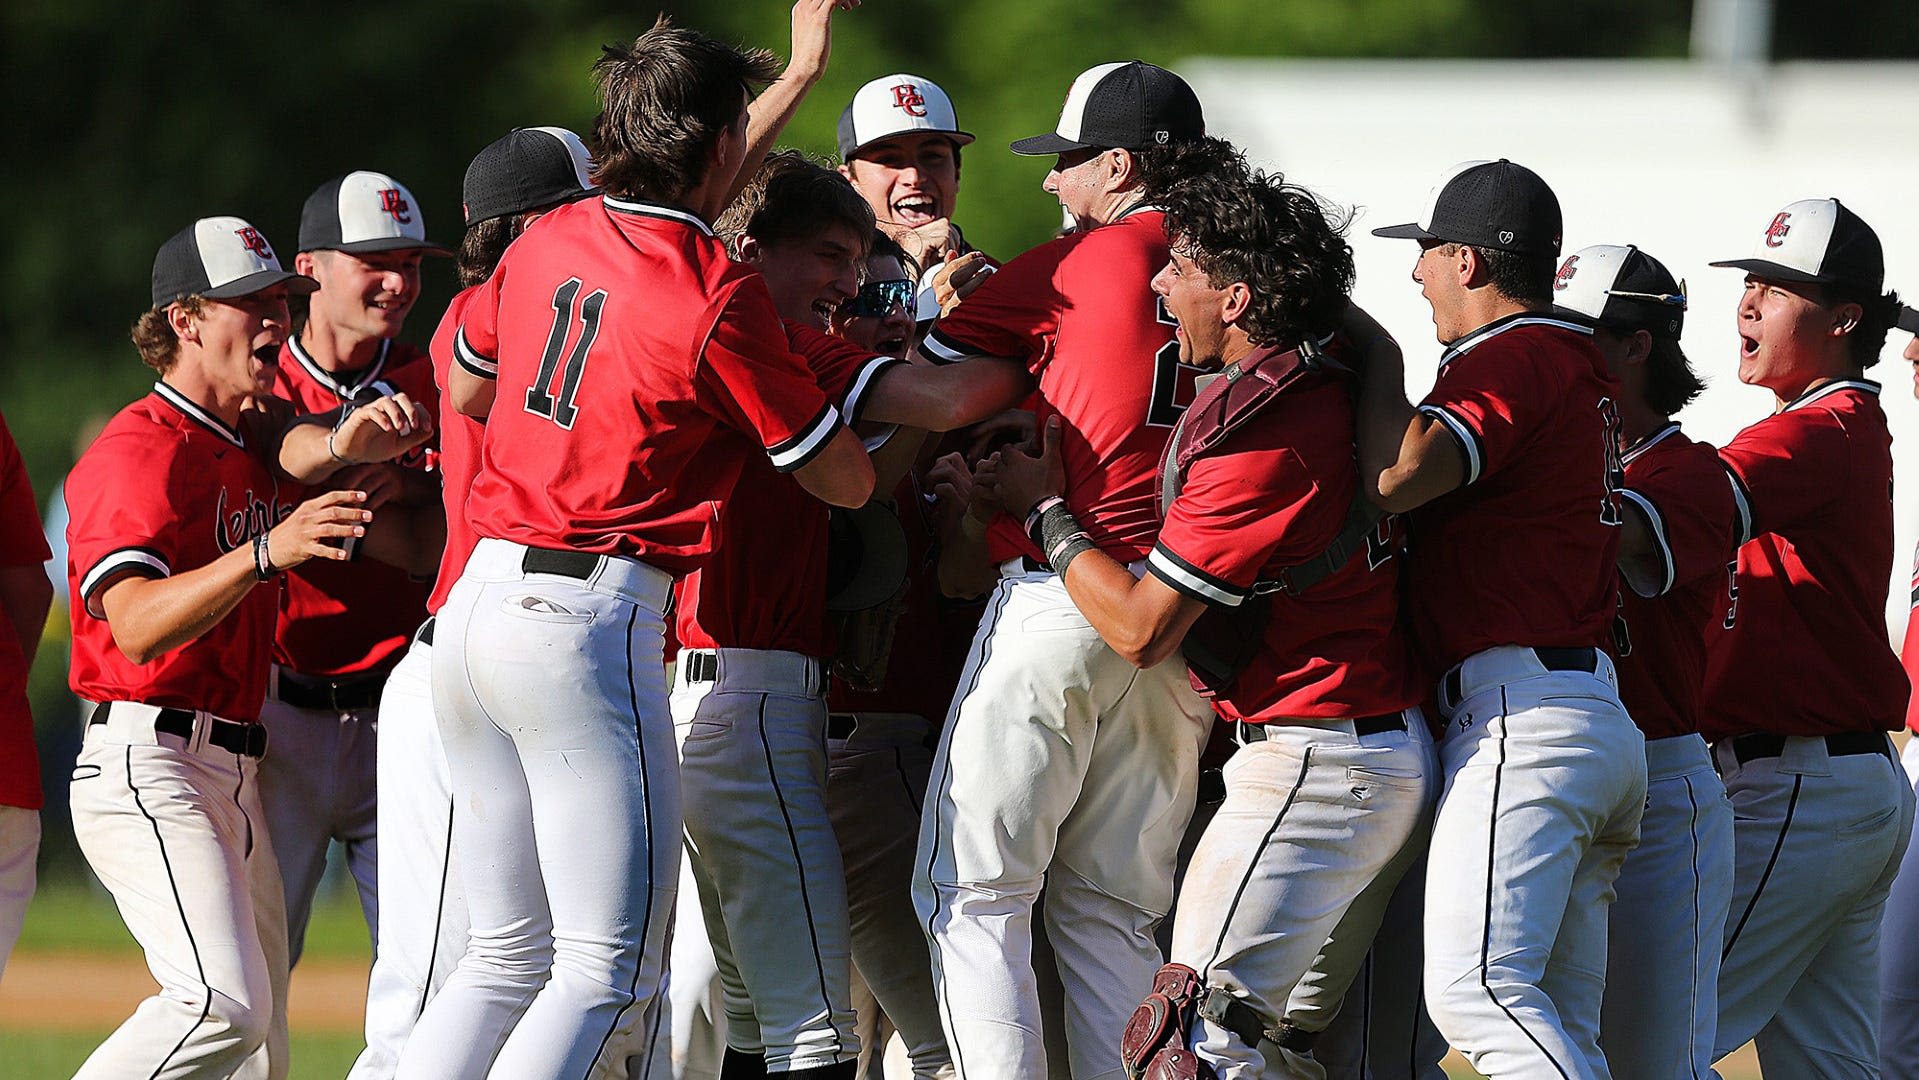 No longer a dark horse, seventh-seeded Hunterdon Central advances to North 2 Group 4 final